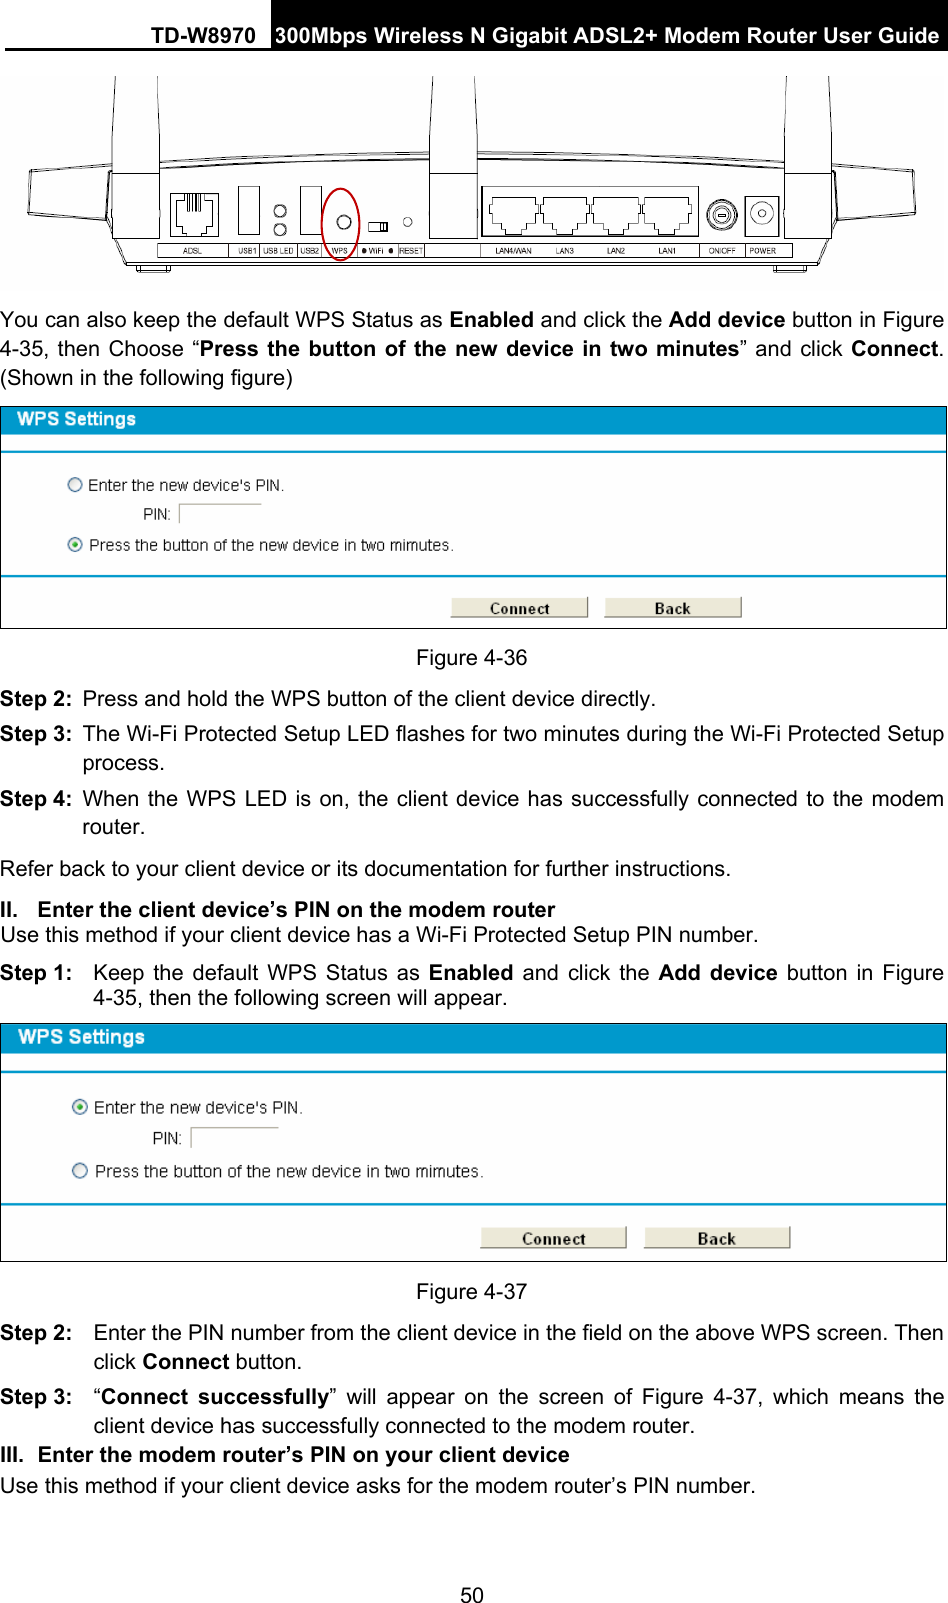 TD-W8970 300Mbps Wireless N Gigabit ADSL2+ Modem Router User Guide 50  You can also keep the default WPS Status as Enabled and click the Add device button in Figure 4-35, then Choose “Press the button of the new device in two minutes” and click Connect. (Shown in the following figure)  Figure 4-36 Step 2:  Press and hold the WPS button of the client device directly.   Step 3:  The Wi-Fi Protected Setup LED flashes for two minutes during the Wi-Fi Protected Setup process.  Step 4:  When the WPS LED is on, the client device has successfully connected to the modem router.  Refer back to your client device or its documentation for further instructions. II.  Enter the client device’s PIN on the modem router Use this method if your client device has a Wi-Fi Protected Setup PIN number. Step 1:  Keep the default WPS Status as Enabled and click the Add device button in Figure 4-35, then the following screen will appear.    Figure 4-37 Step 2:  Enter the PIN number from the client device in the field on the above WPS screen. Then click Connect button. Step 3:  “Connect successfully” will appear on the screen of Figure 4-37, which means the client device has successfully connected to the modem router. III.  Enter the modem router’s PIN on your client device Use this method if your client device asks for the modem router’s PIN number.   